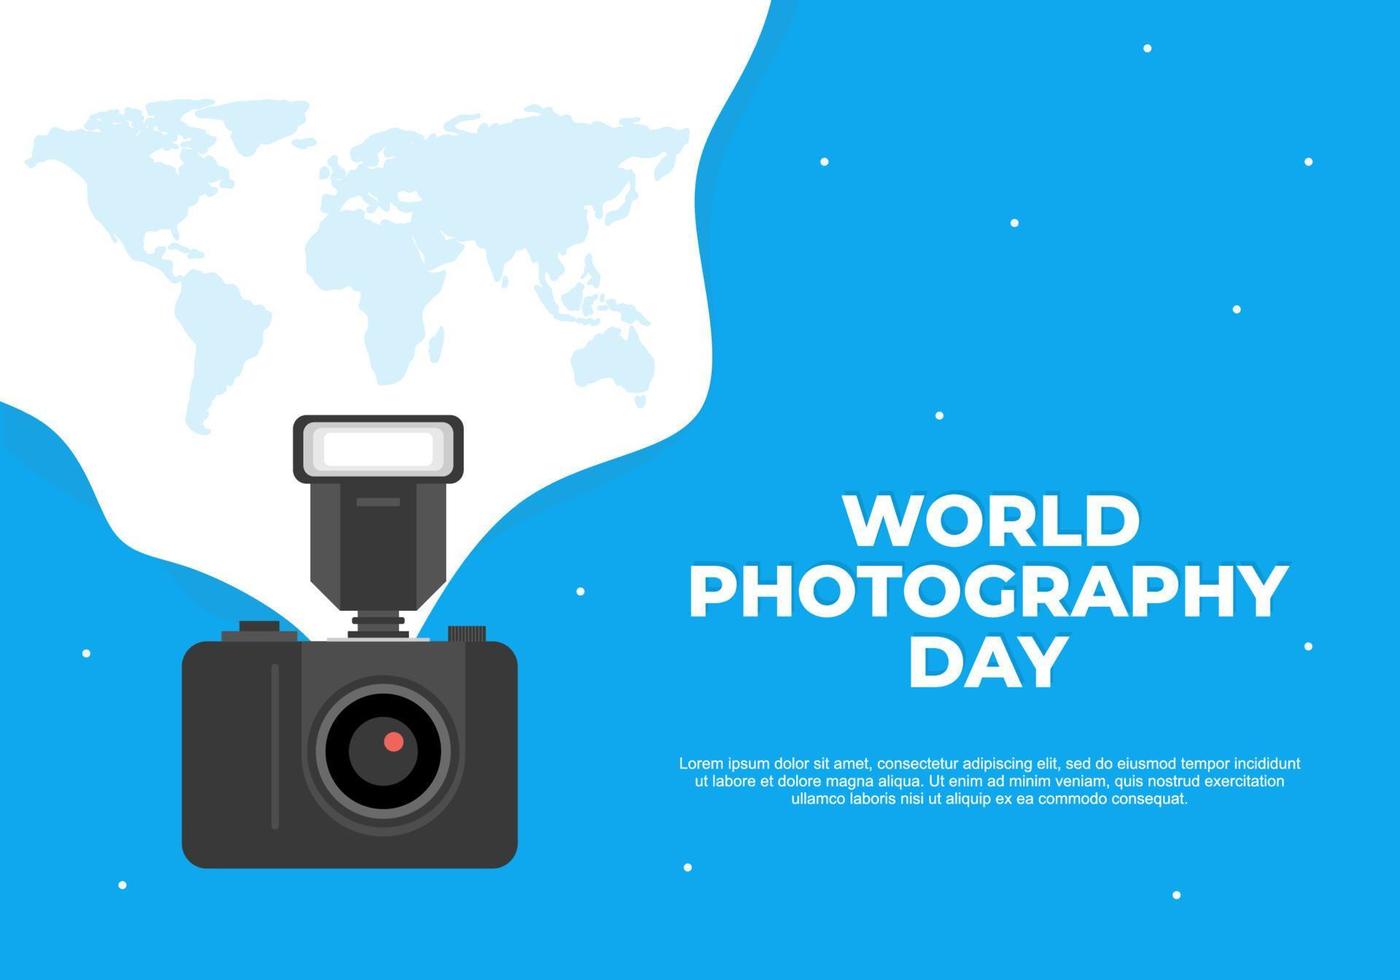 World photography day banner poster on august 19 with modern camera and world map on blue background. vector